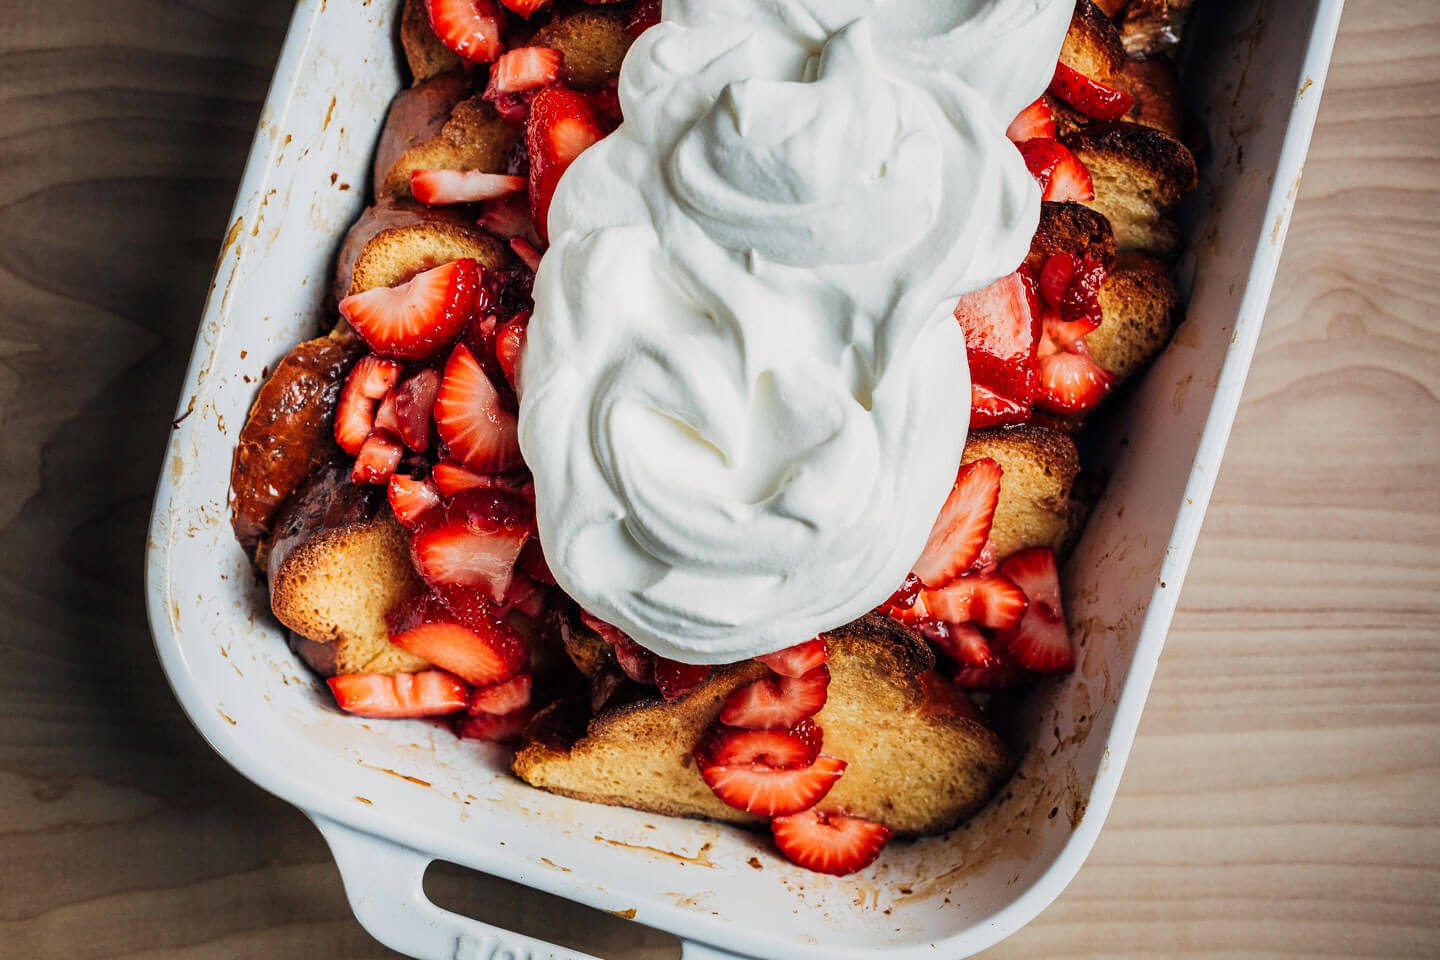 Baked French toast topped with strawberries and cream